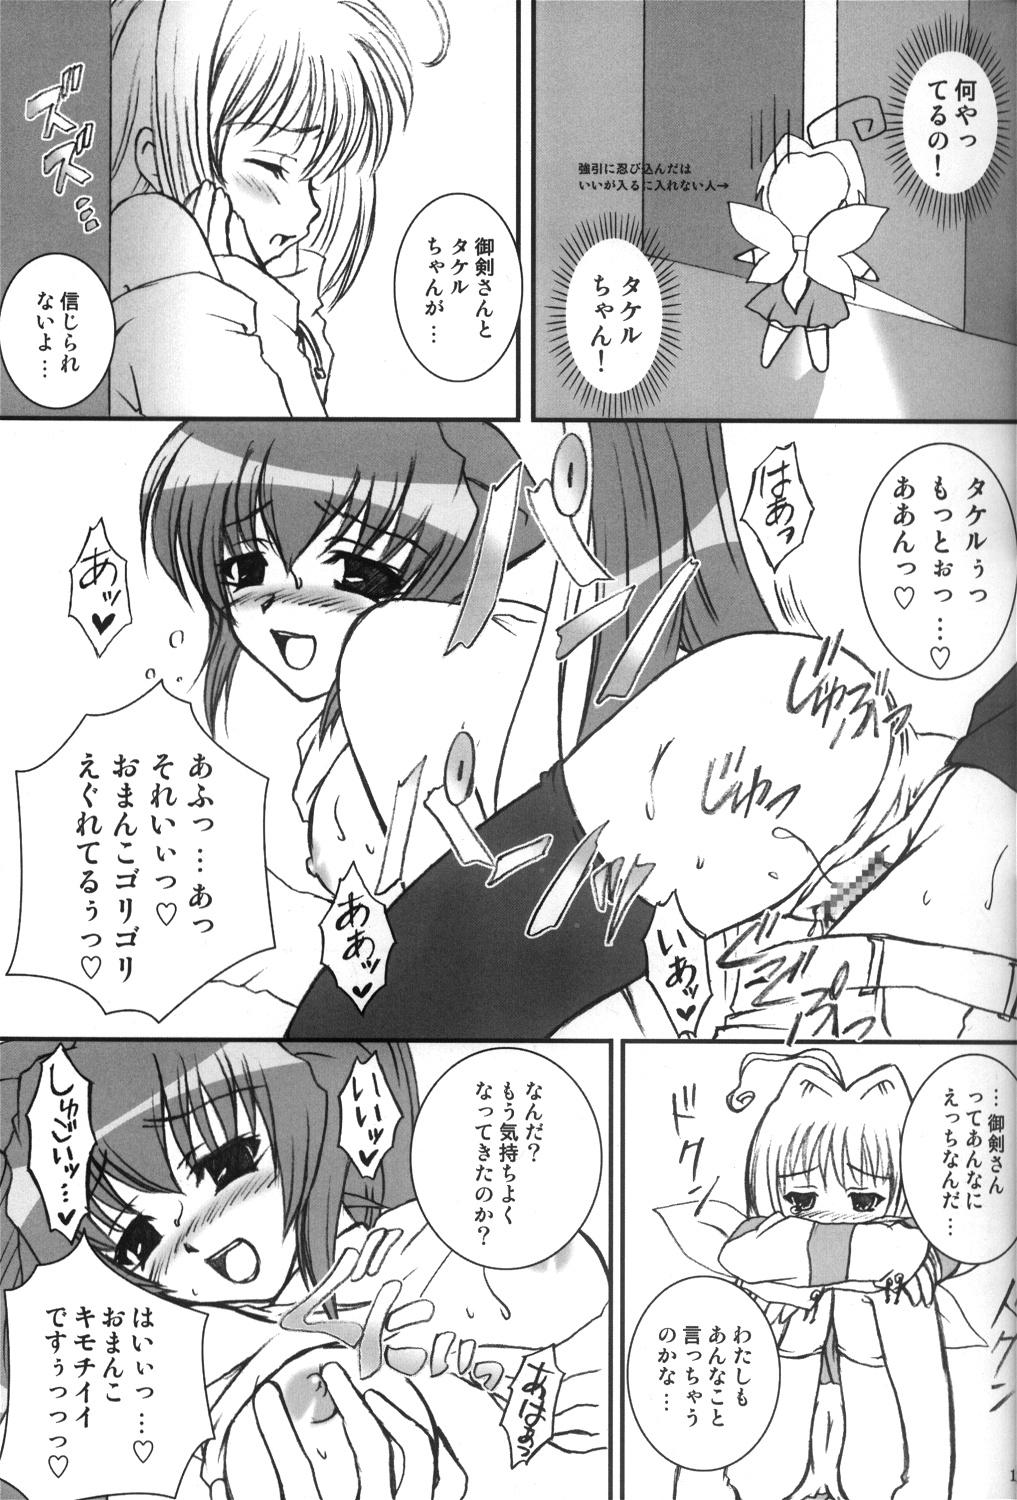 Mmf I have fallen in love with you... - Muv luv Camshow - Page 12